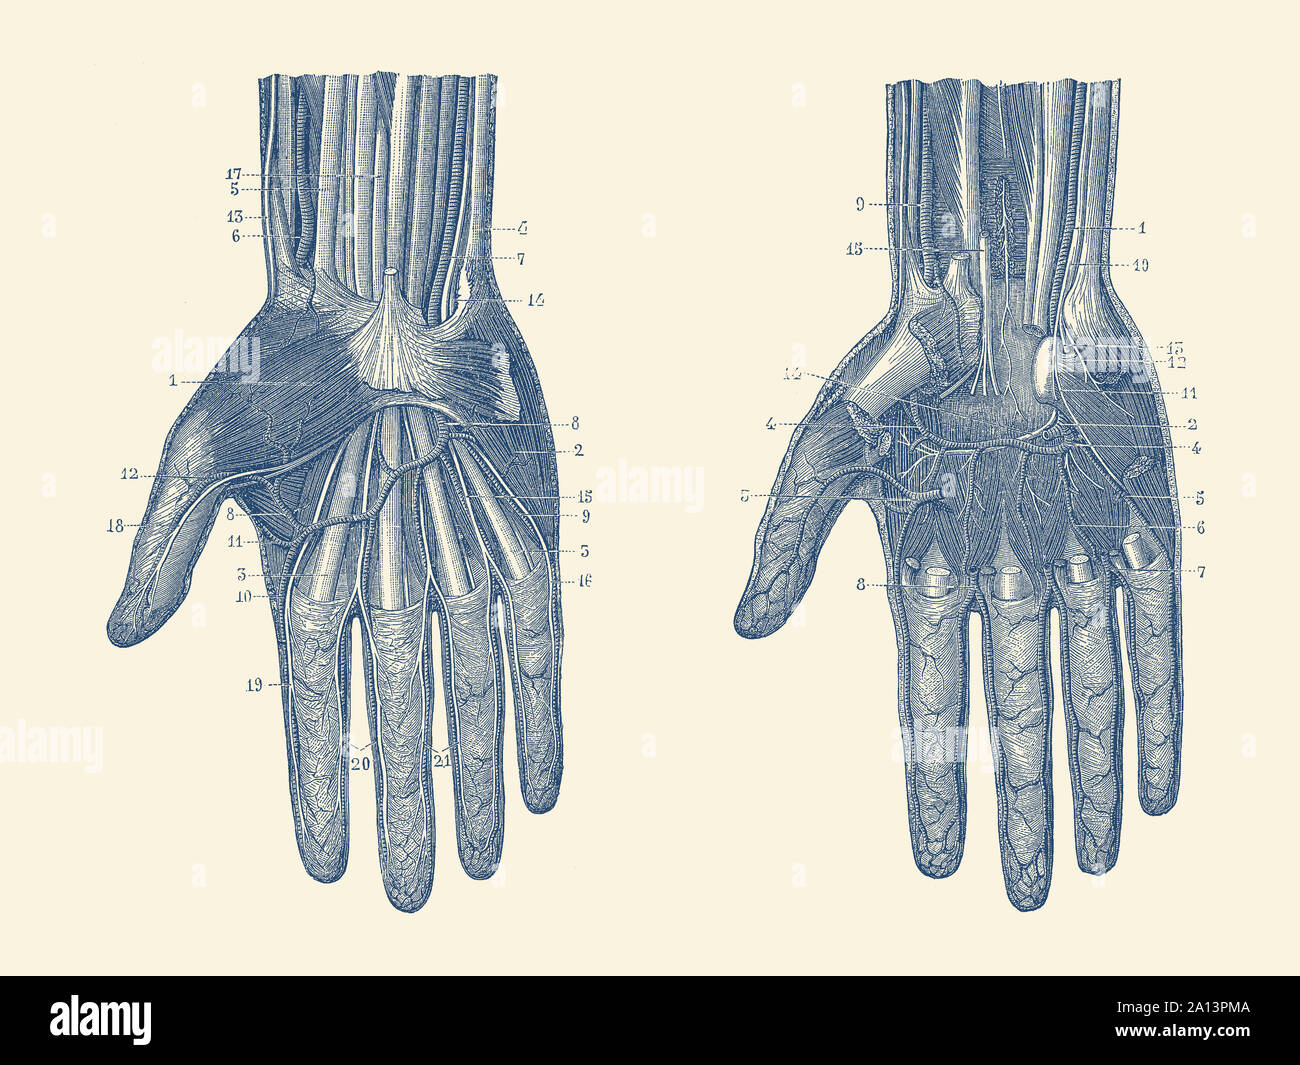 Dual view of the human hand, showcasing the muscles, bones and veins throughout. Stock Photo